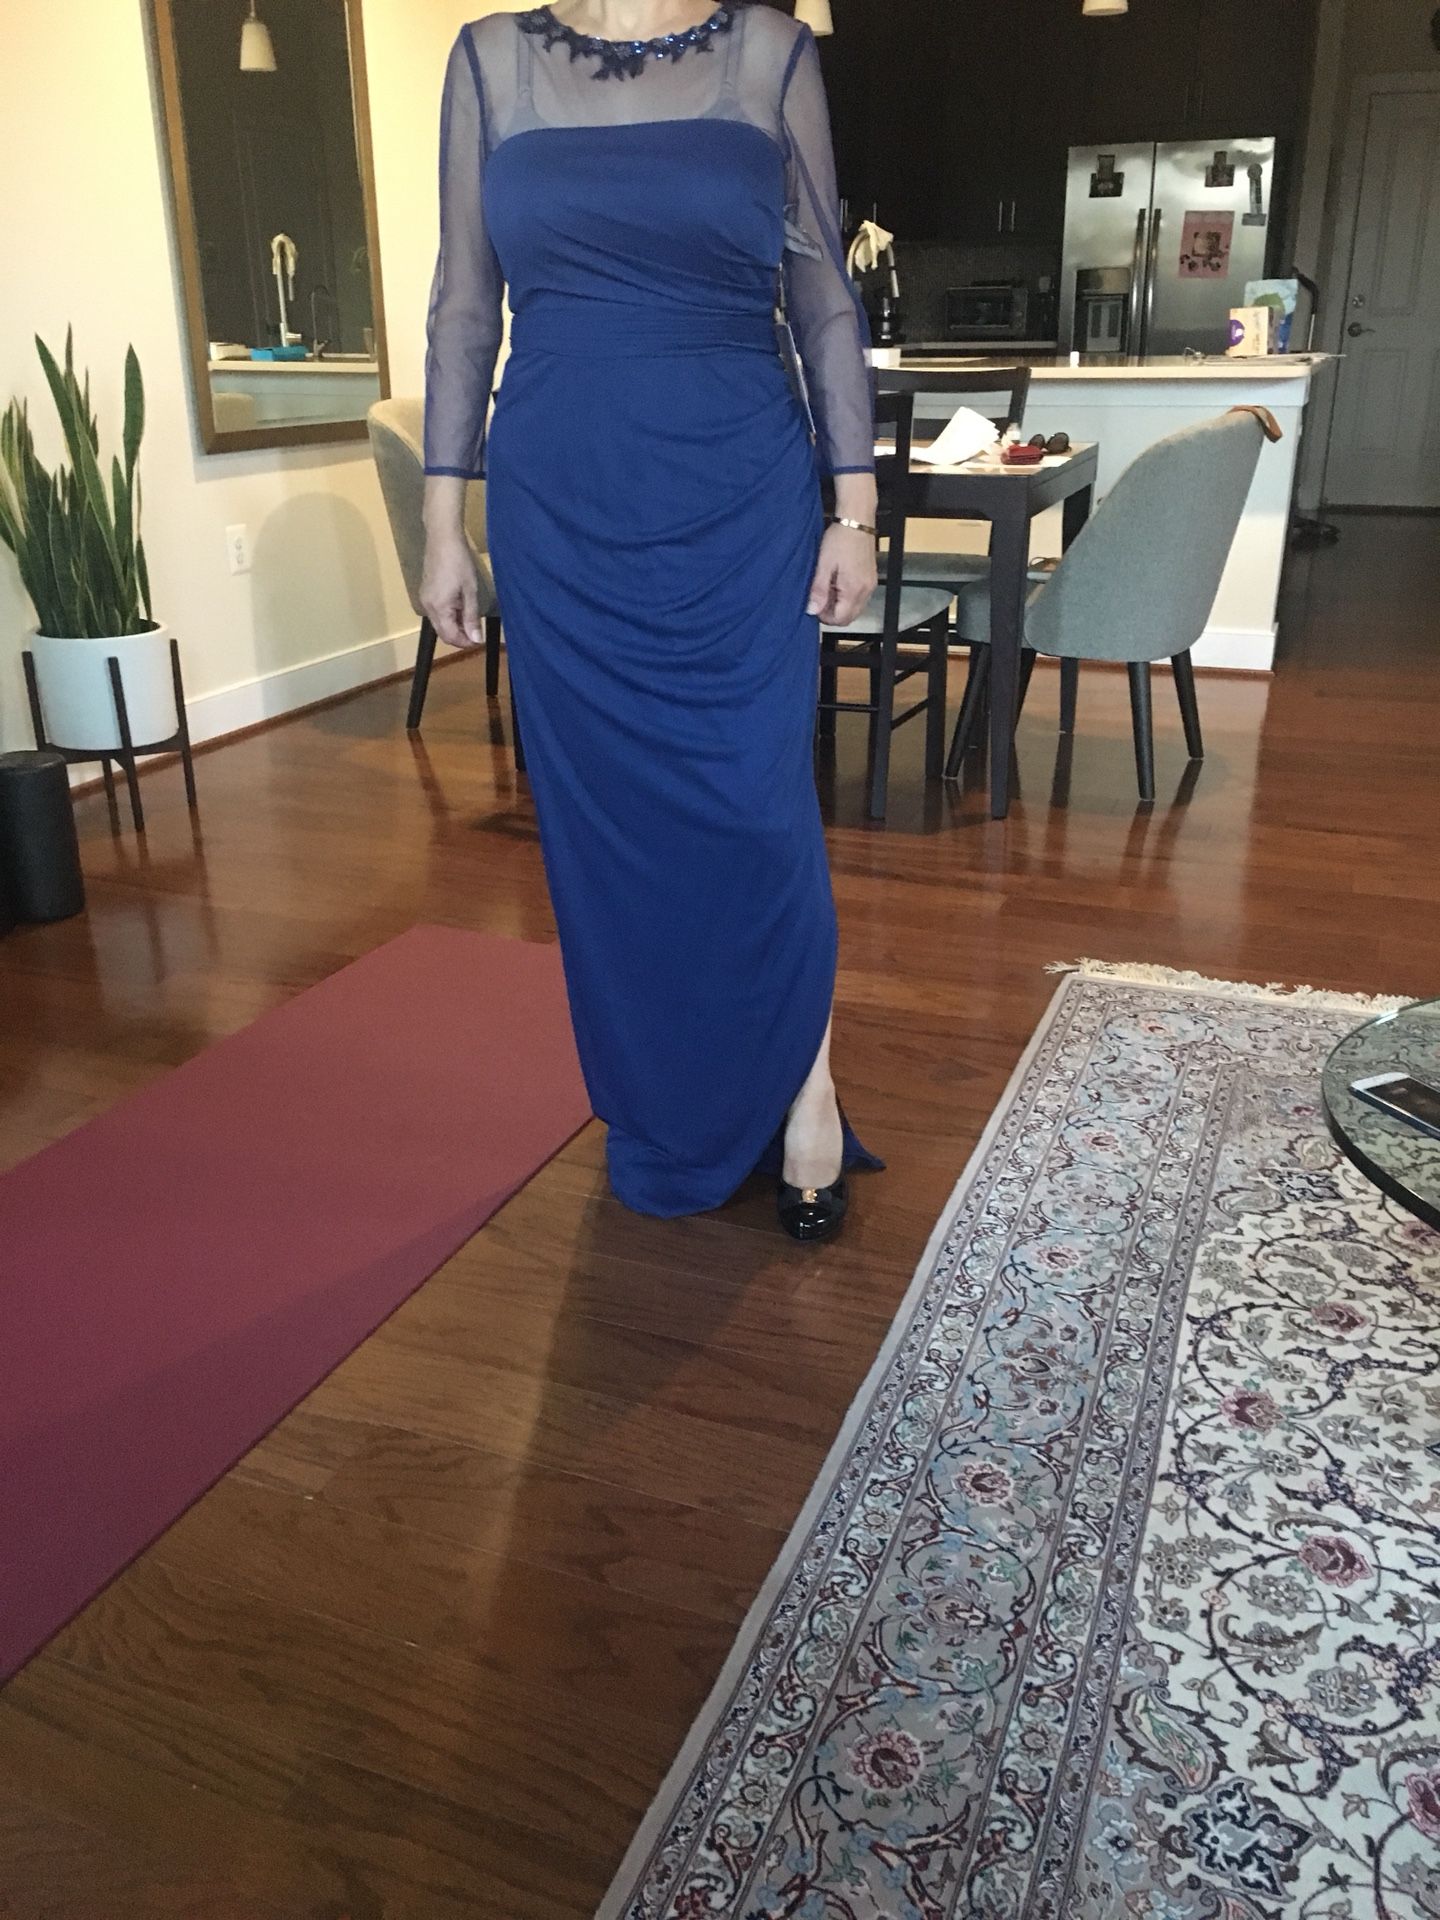 jS collection size8 maxi dress sutible for mother of bride it is big on me very nice dress